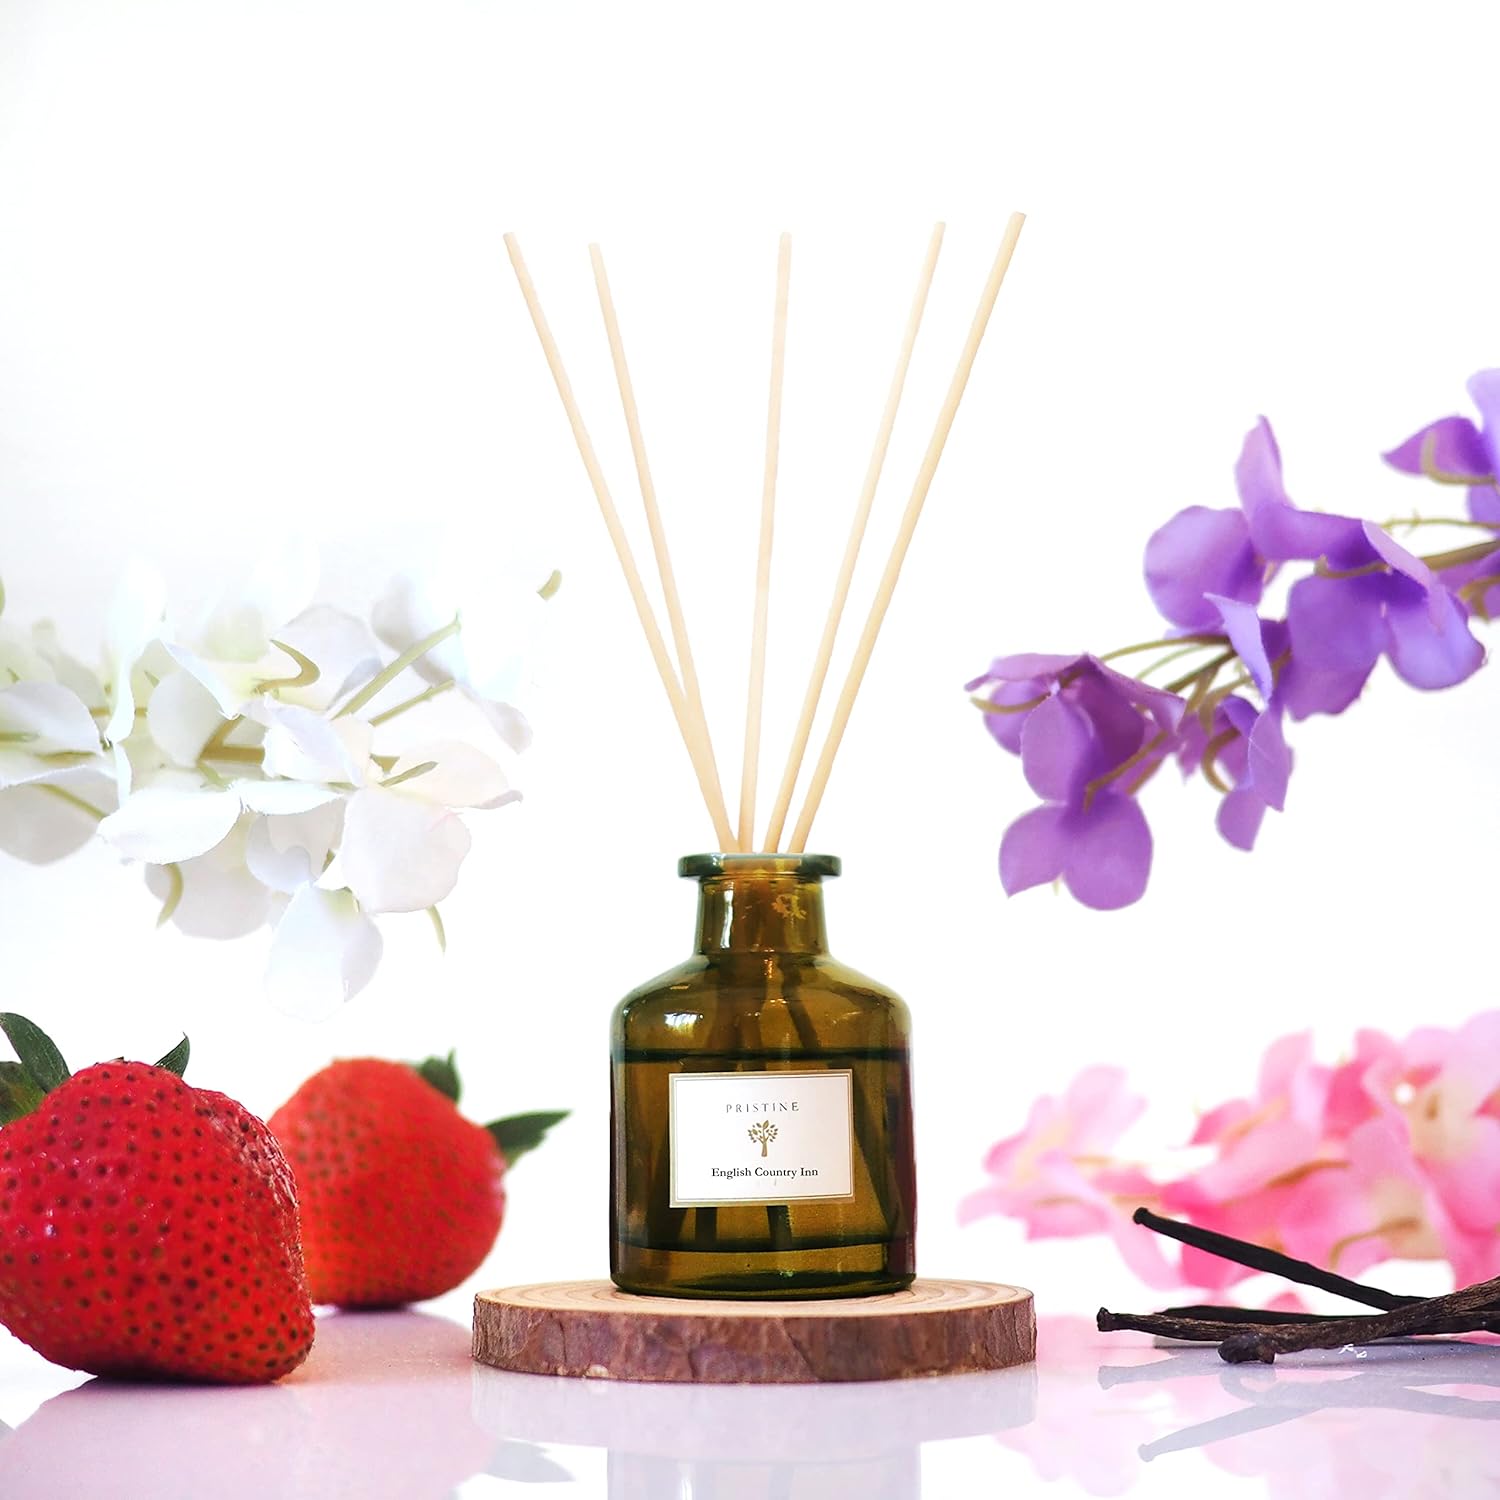 With these reed diffusers we are able to get the look and feel of scenting rooms just like the big hotel chains. It' a nice way to spice up a room. Love all the scents, but Japanese Ryokan/Inspired by Shangri-la Hotel is our favorite. And the bottles are attractive too. Happy they have refills, because we just can't bear to toss out one.